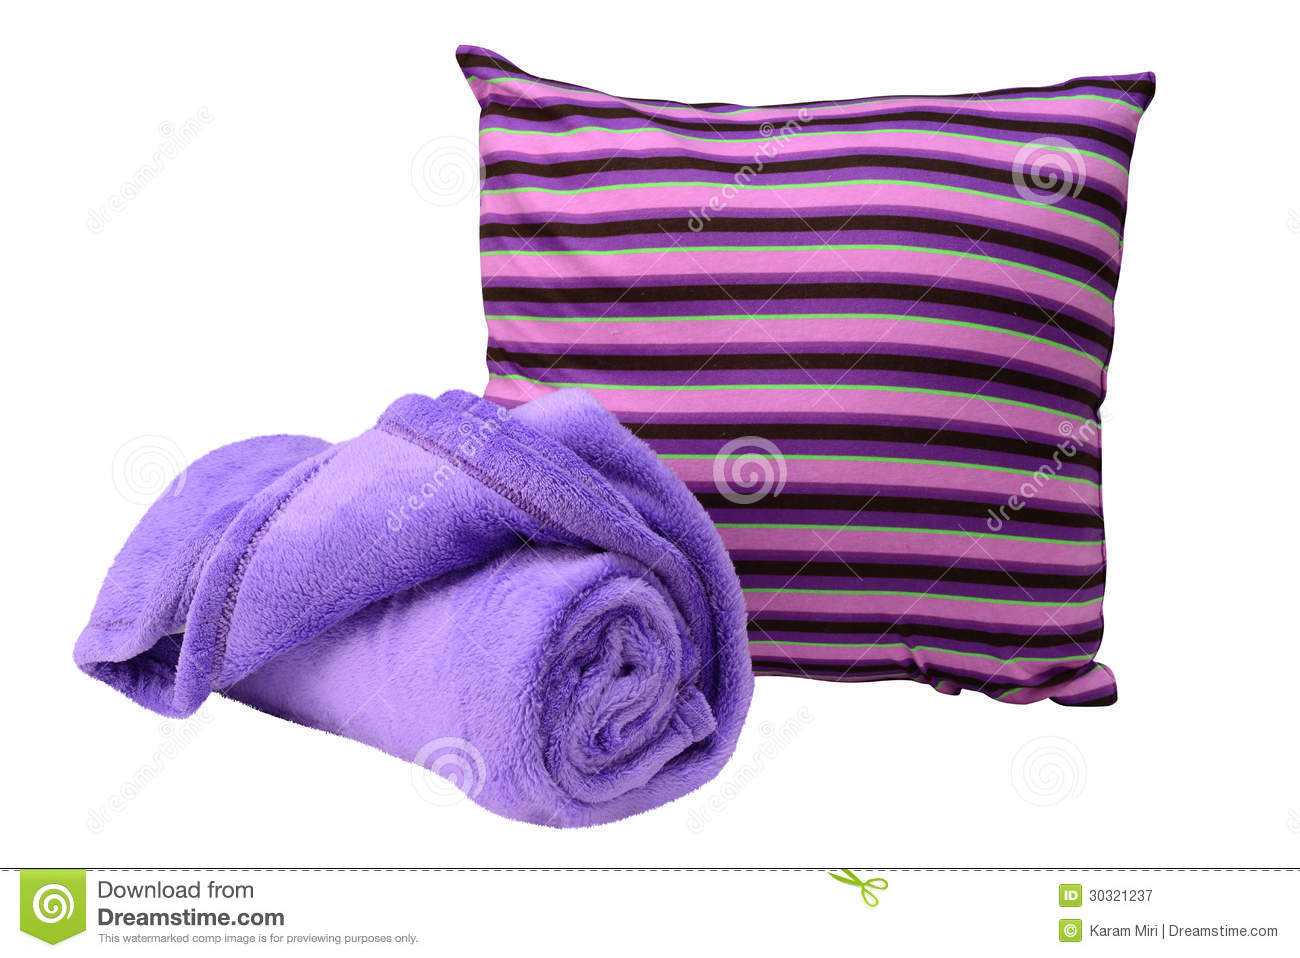 Rolled Up Blanket On Soft Pillow Mr No Pr No 2 166 2